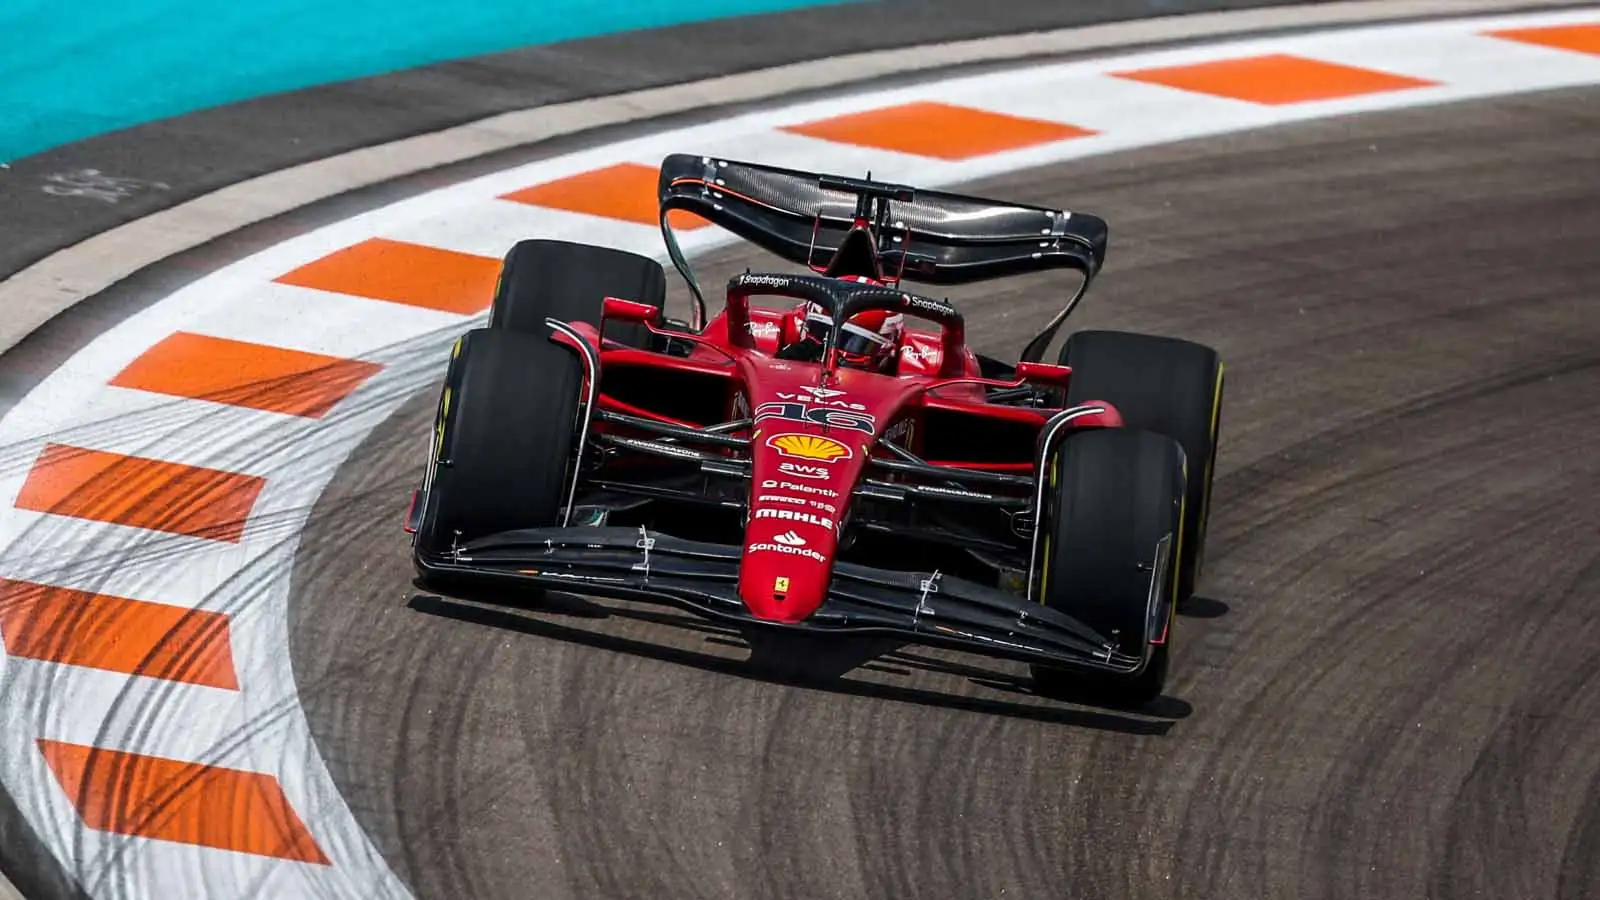 Charles Leclerc in FP1. Miami GP May 2022.